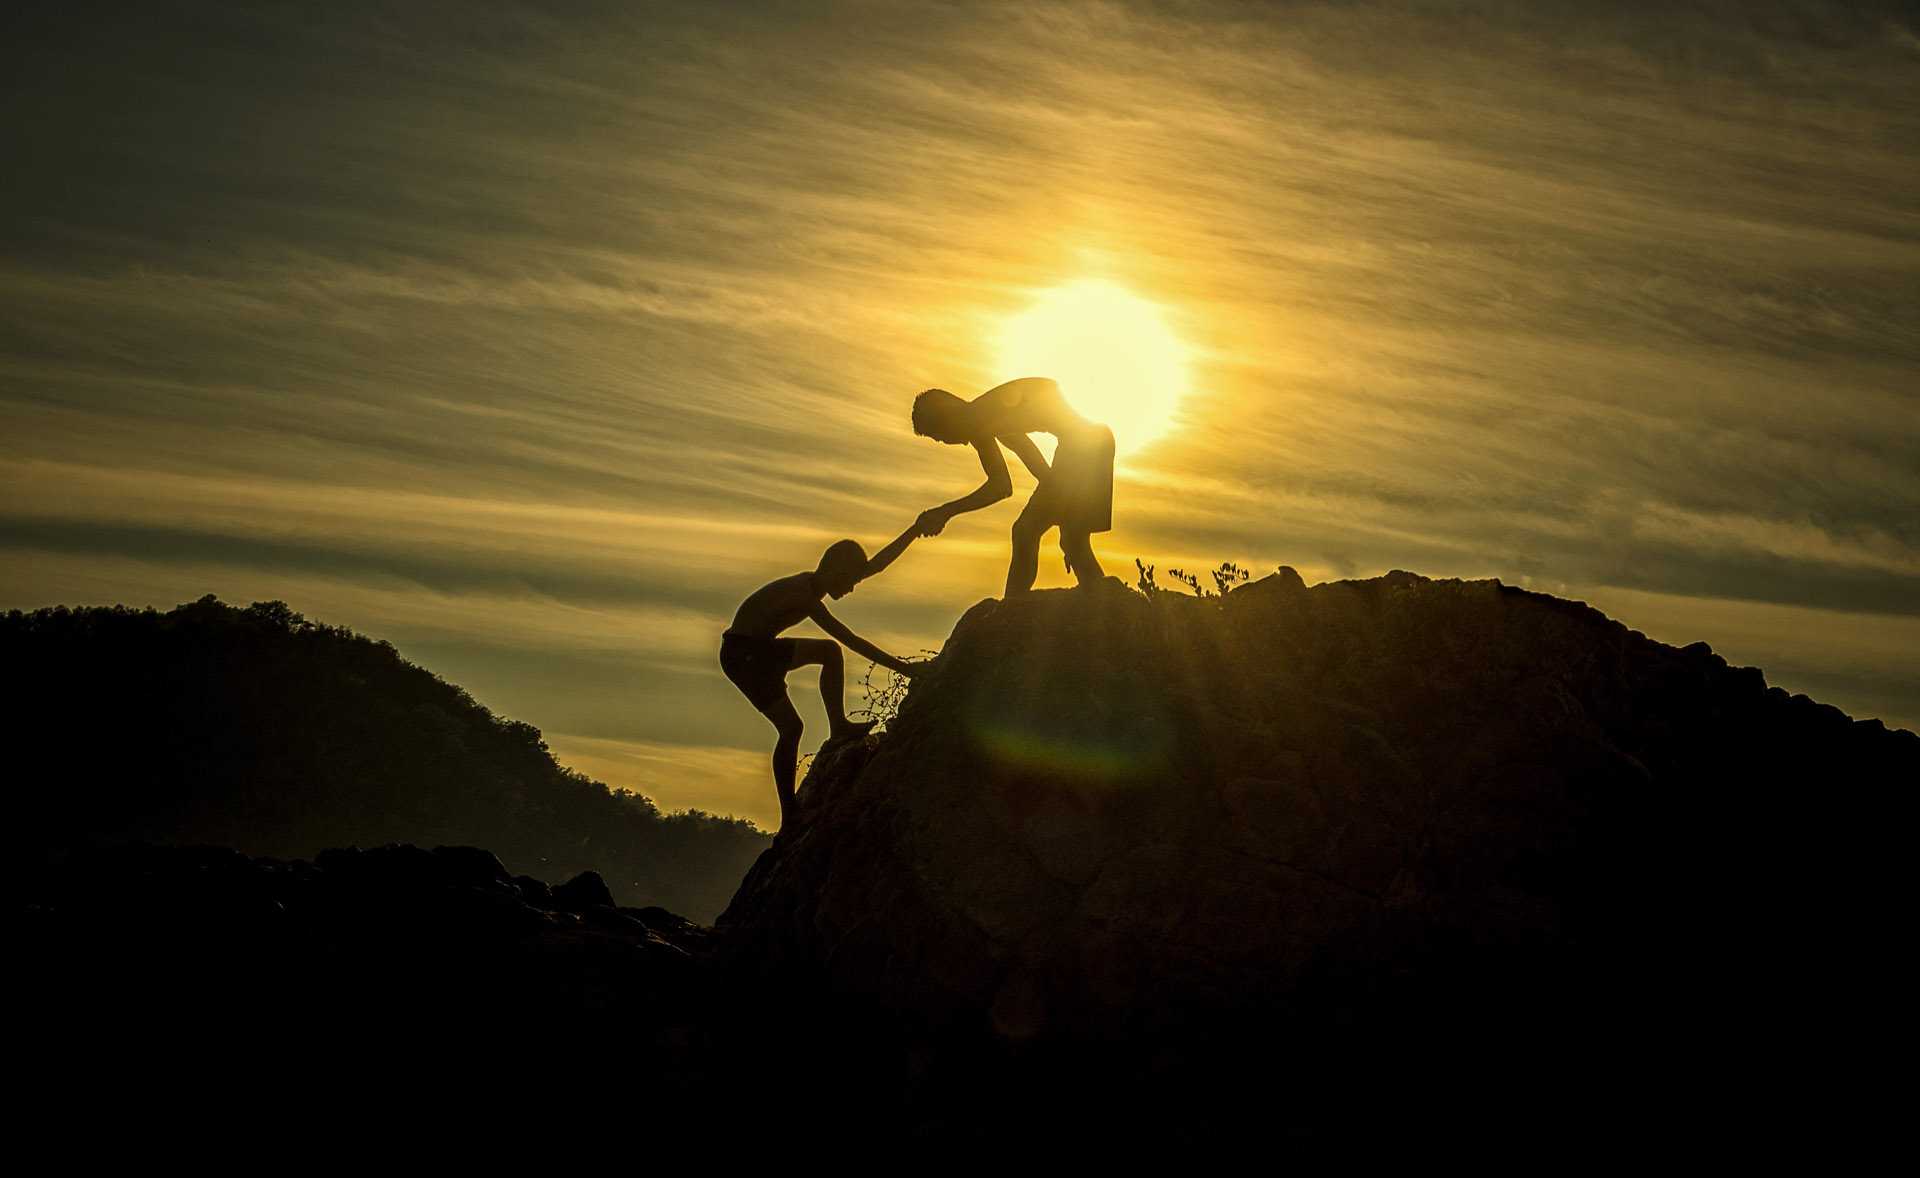 Two people helping each other up a mountain with sunset in the background